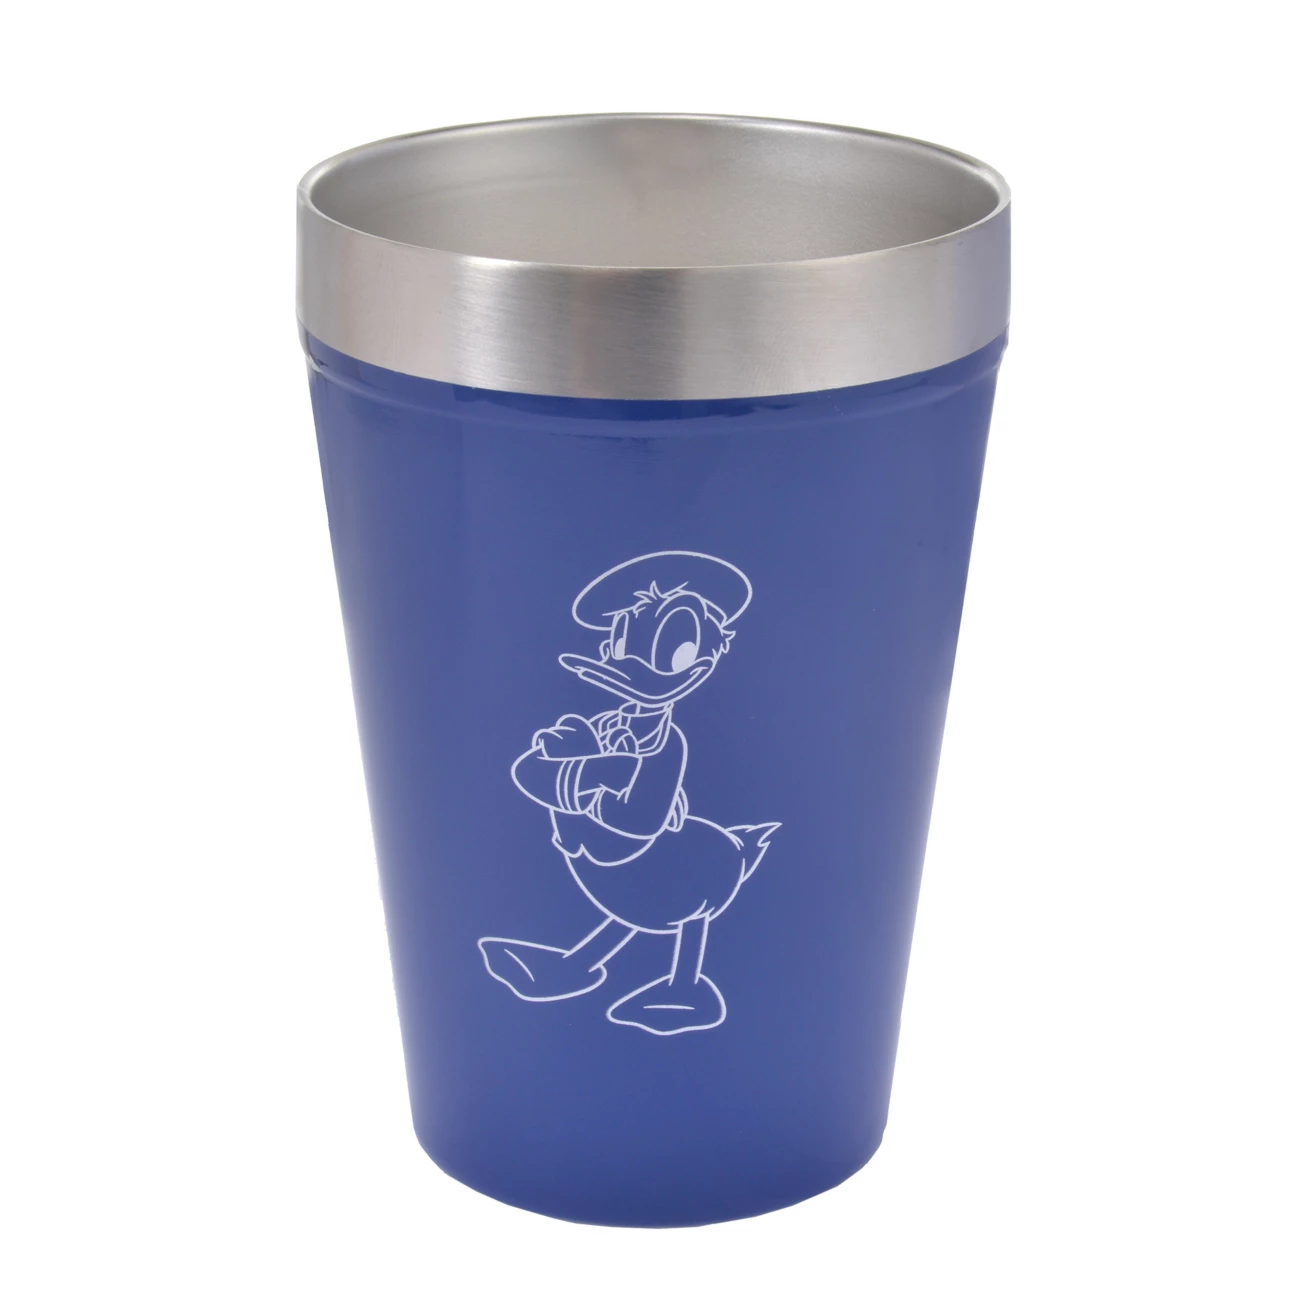 SDJ - DONALD DUCK IT'S MY STYLE Collection - Cup